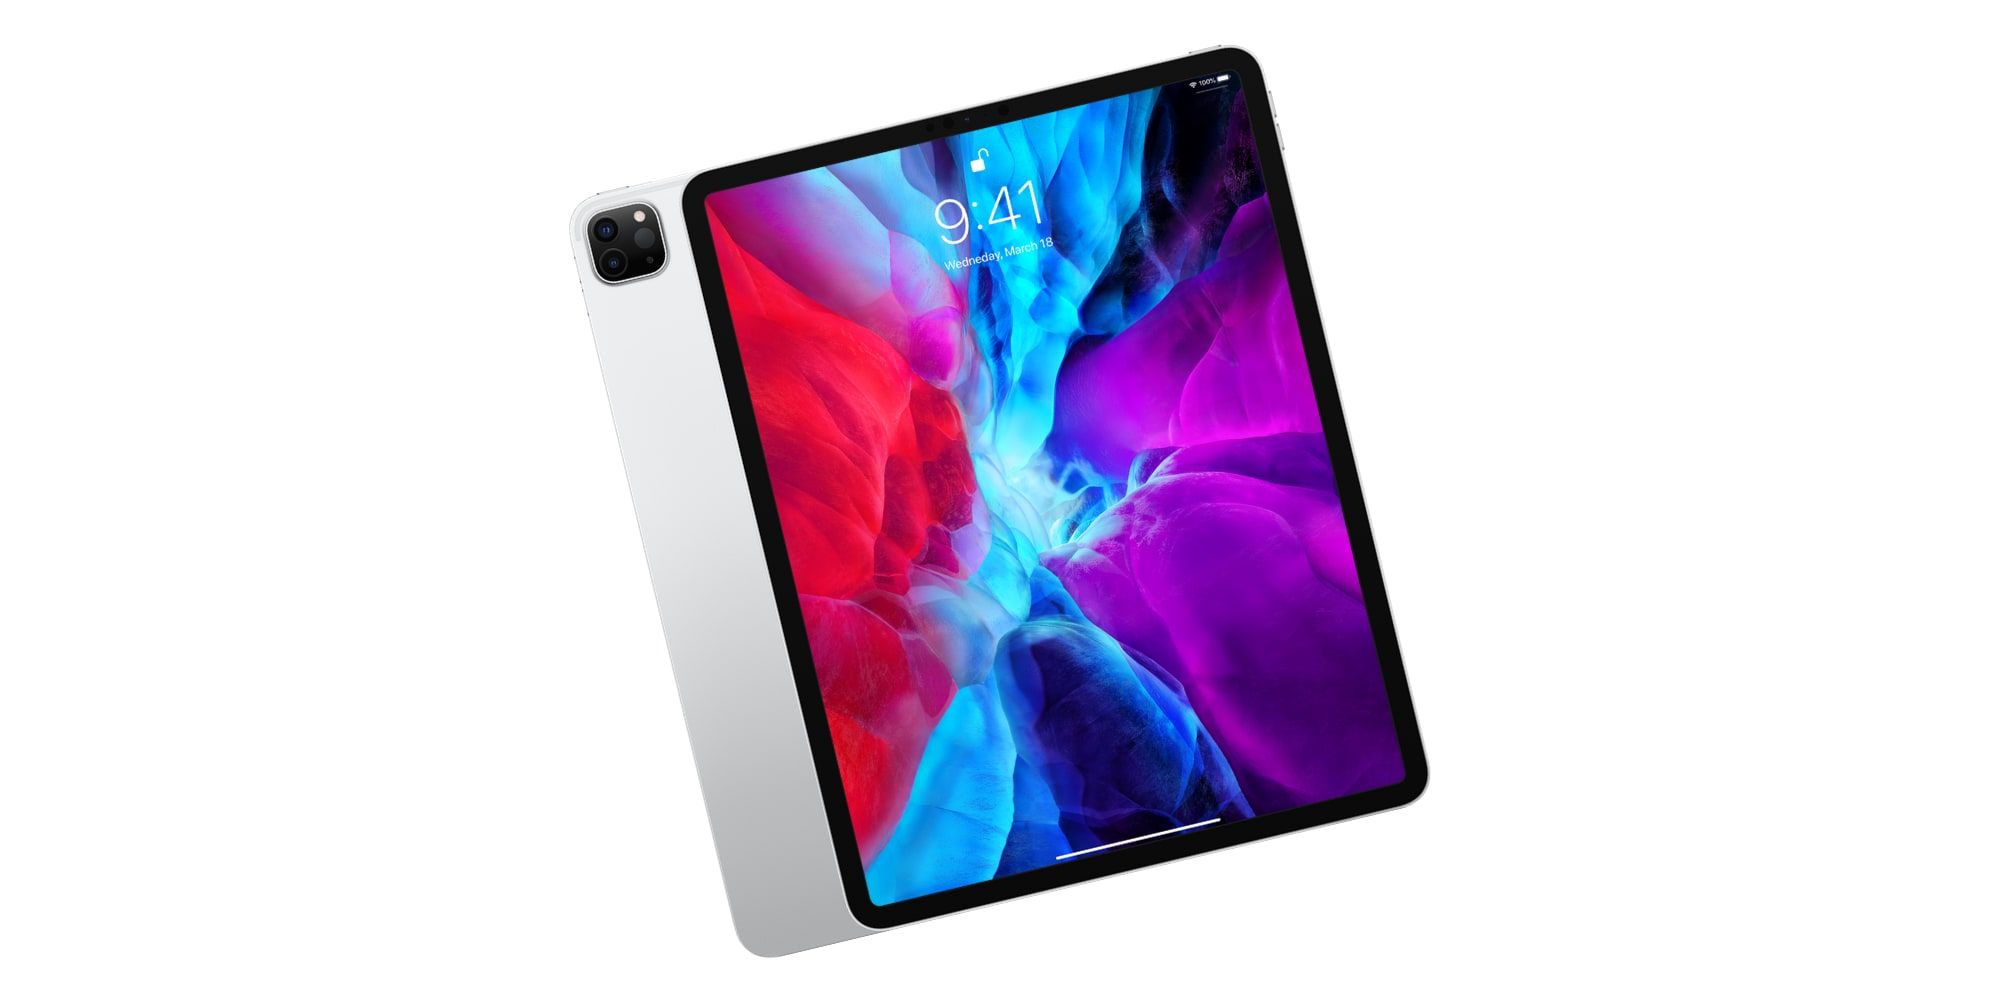 iPad Pro Black Friday Deal: 12.9-inch (4th Gen) Drops Down To $899